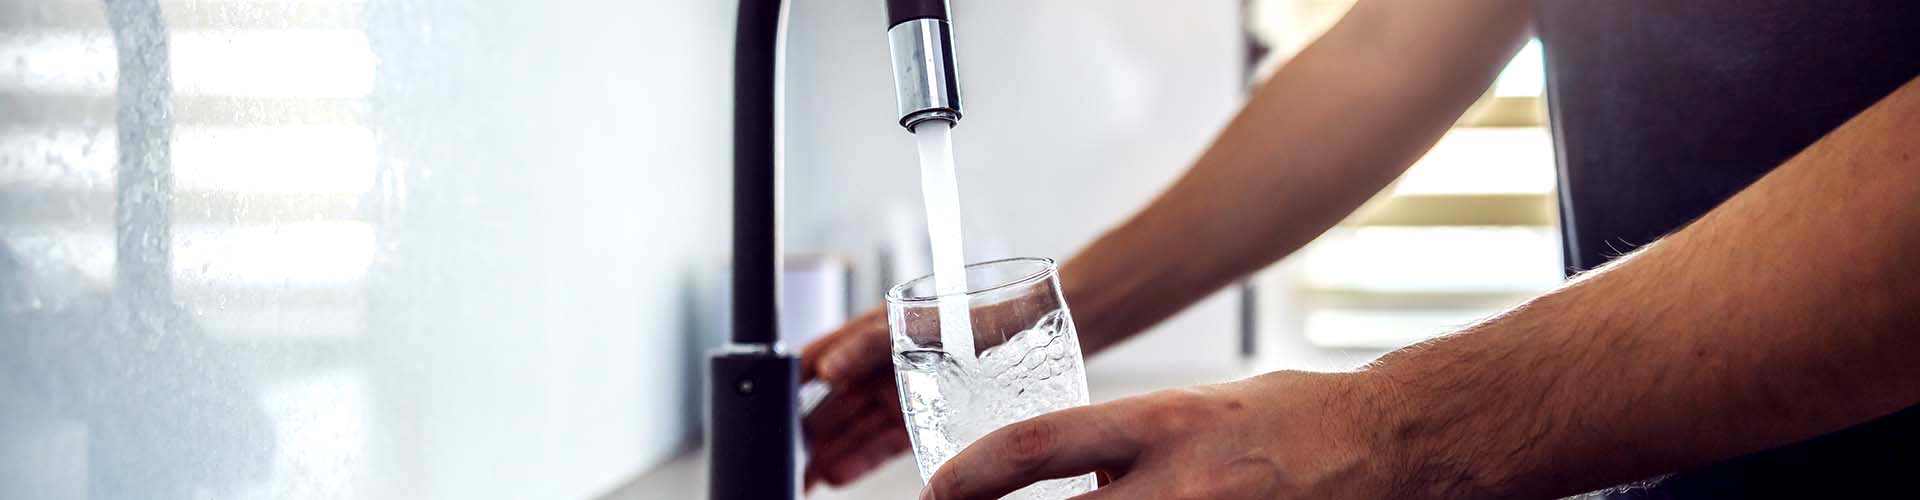 Home Water Filtration System